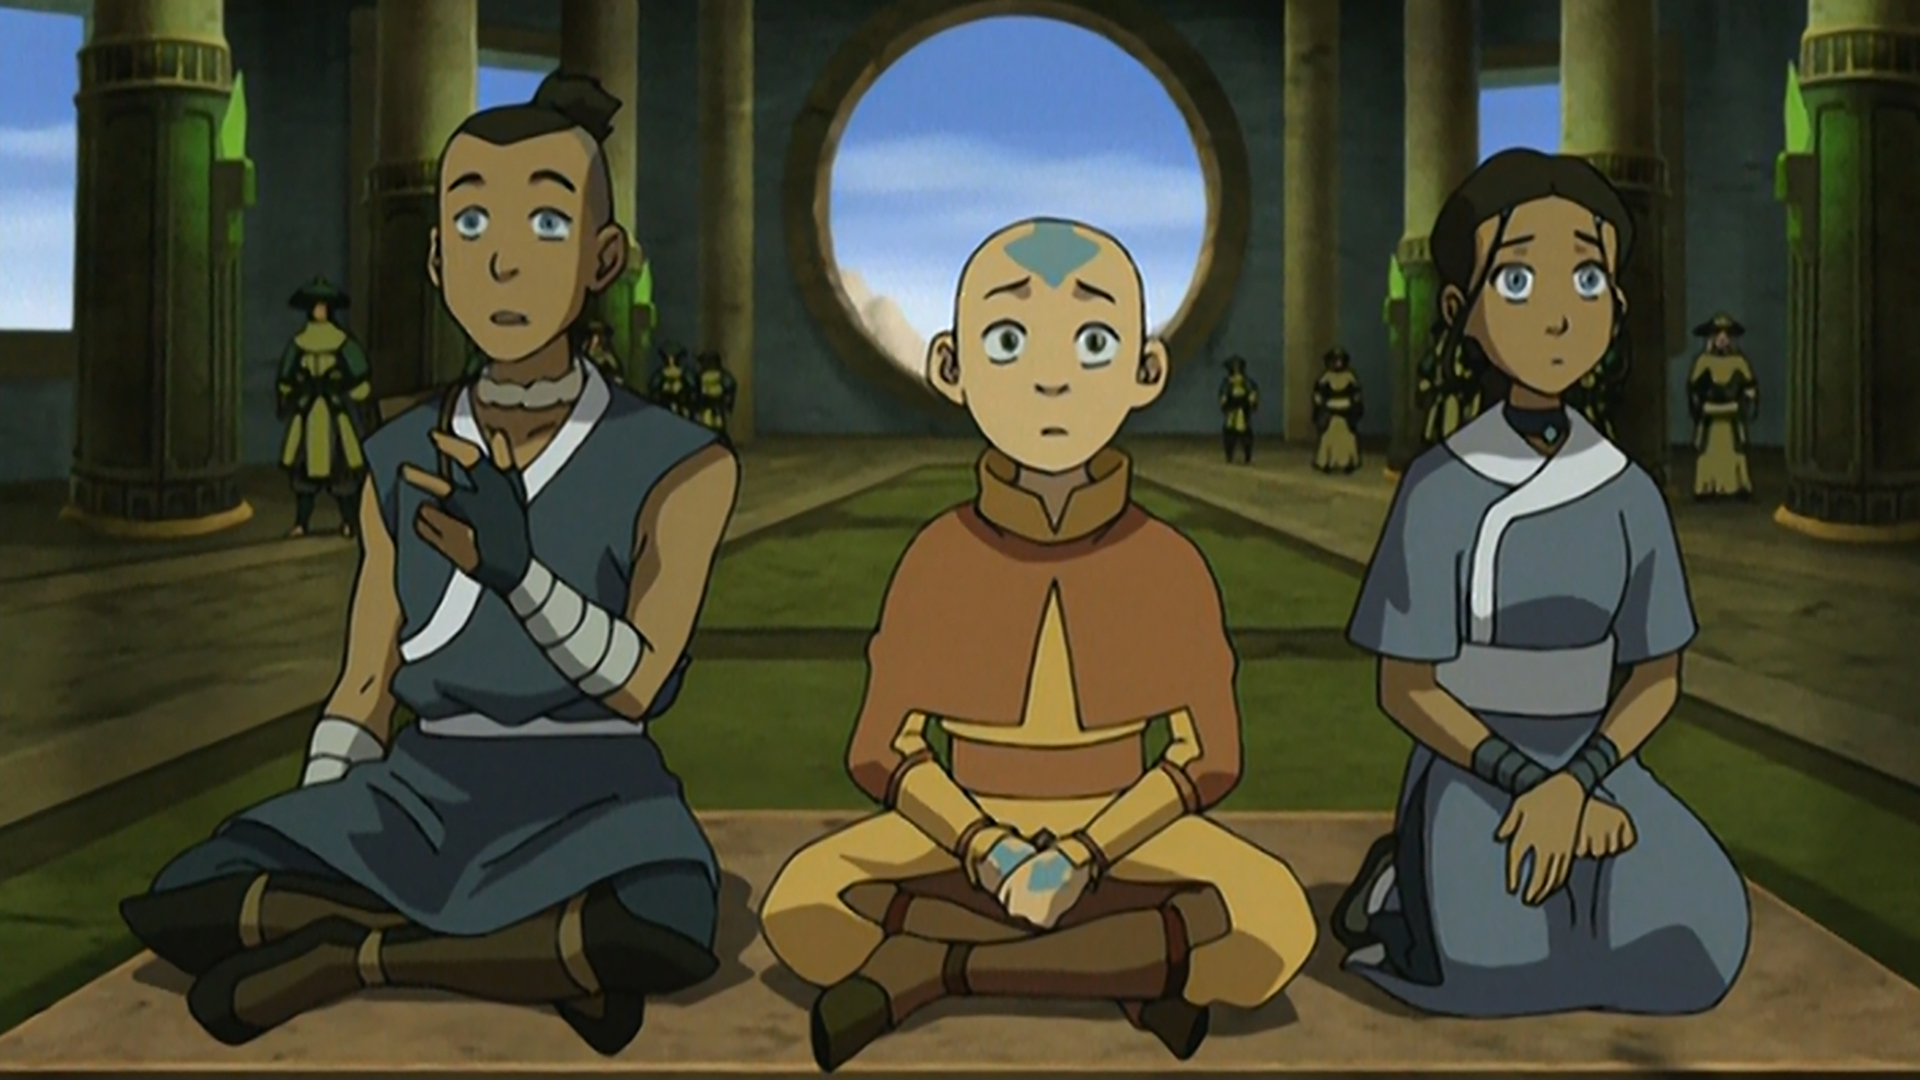 Avatar The Last Airbender  S 1 E 7  Winter Solstice Part 1 The Spirit  World  Dailymotion Video